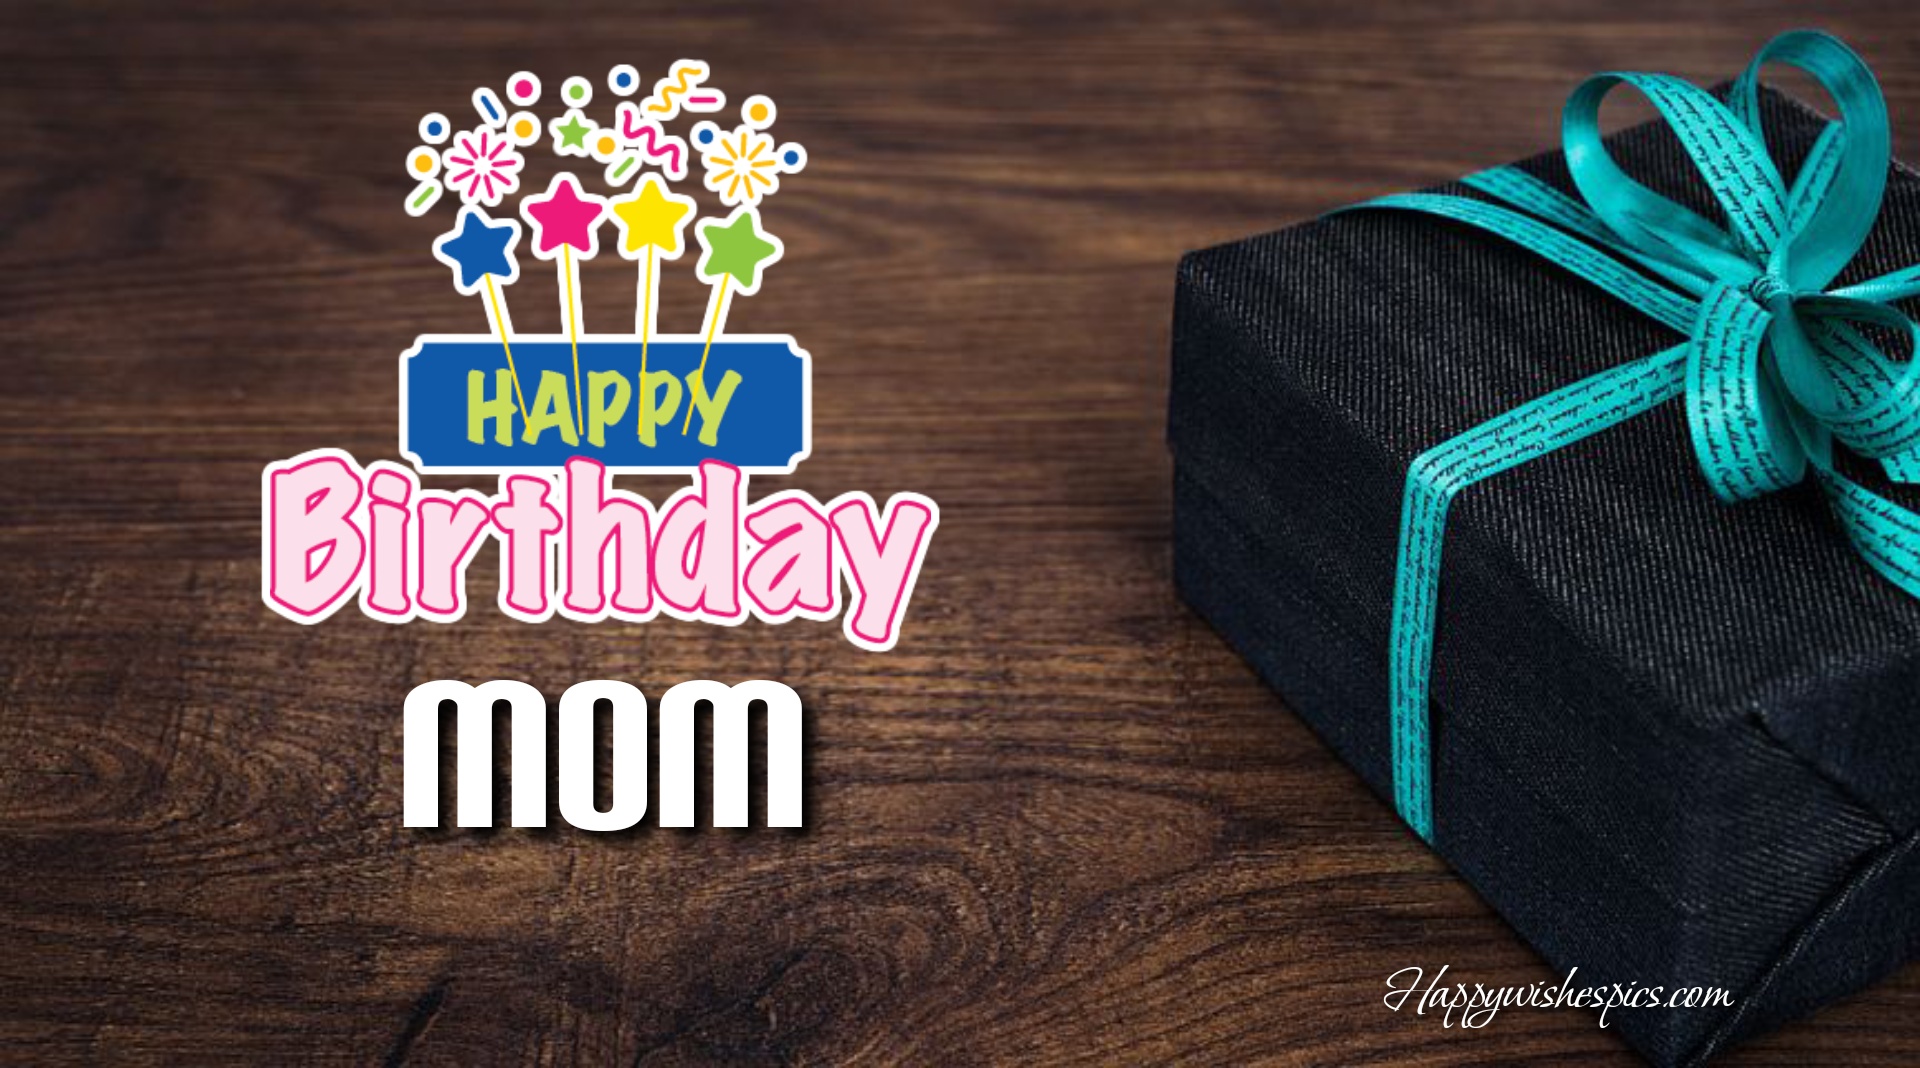 Happy Birthday Wishes & Sayings Images For Mom | Wishes Pics